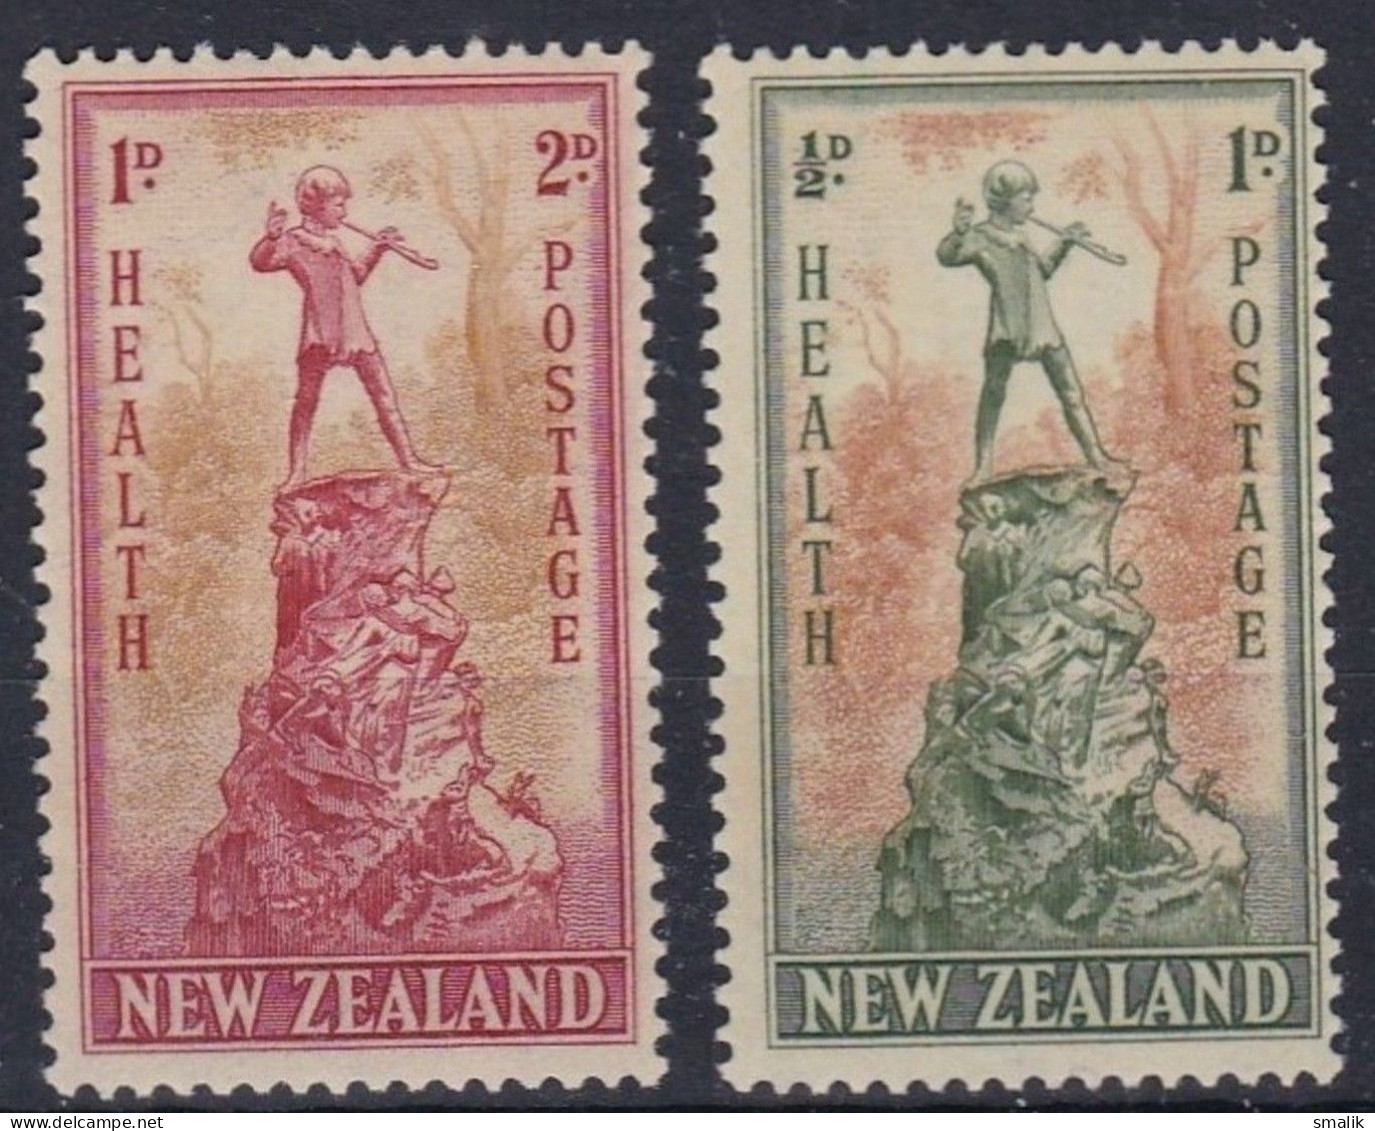 NEW ZEALAND 1945 - Health Surcharge, Peter Pan, Complete Set Of 2v. MNH - Unused Stamps